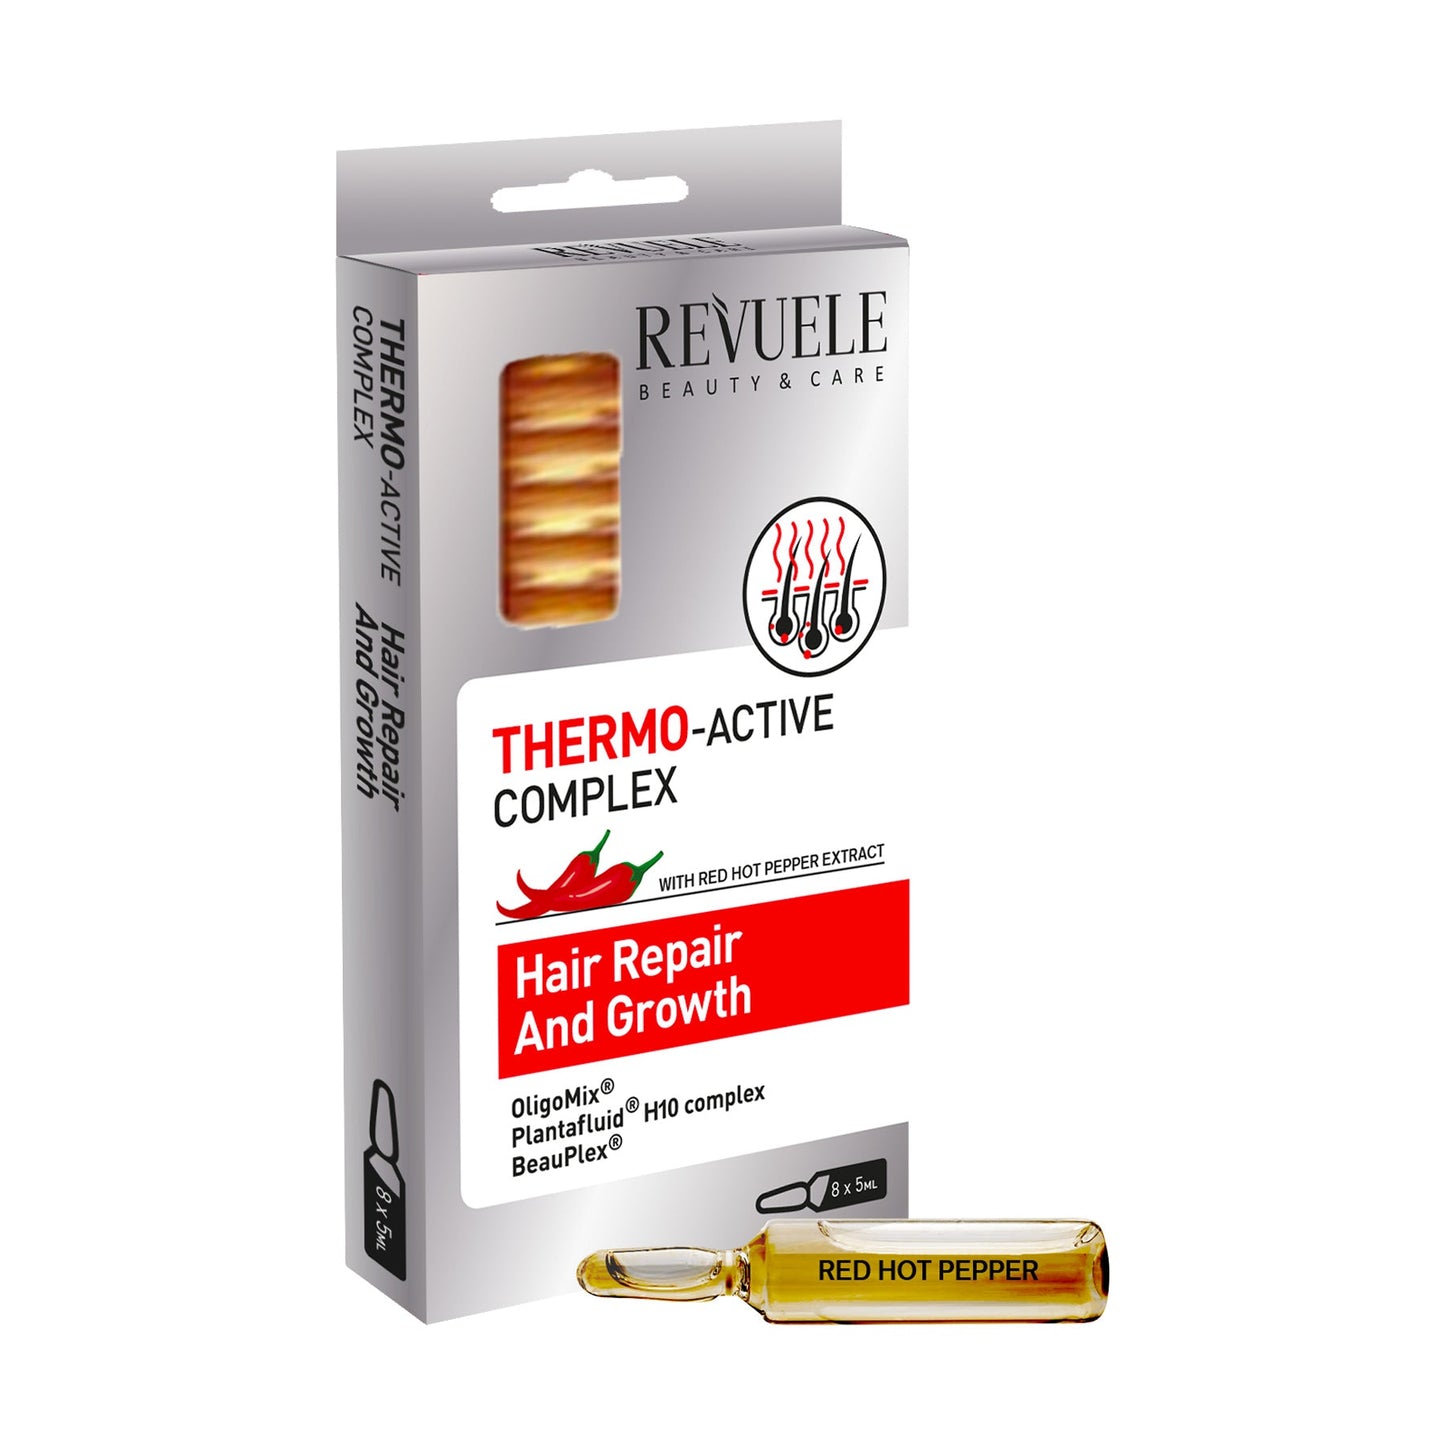 Revuele THERMO ACTIVE COMPLEX Hair Repair & Growth